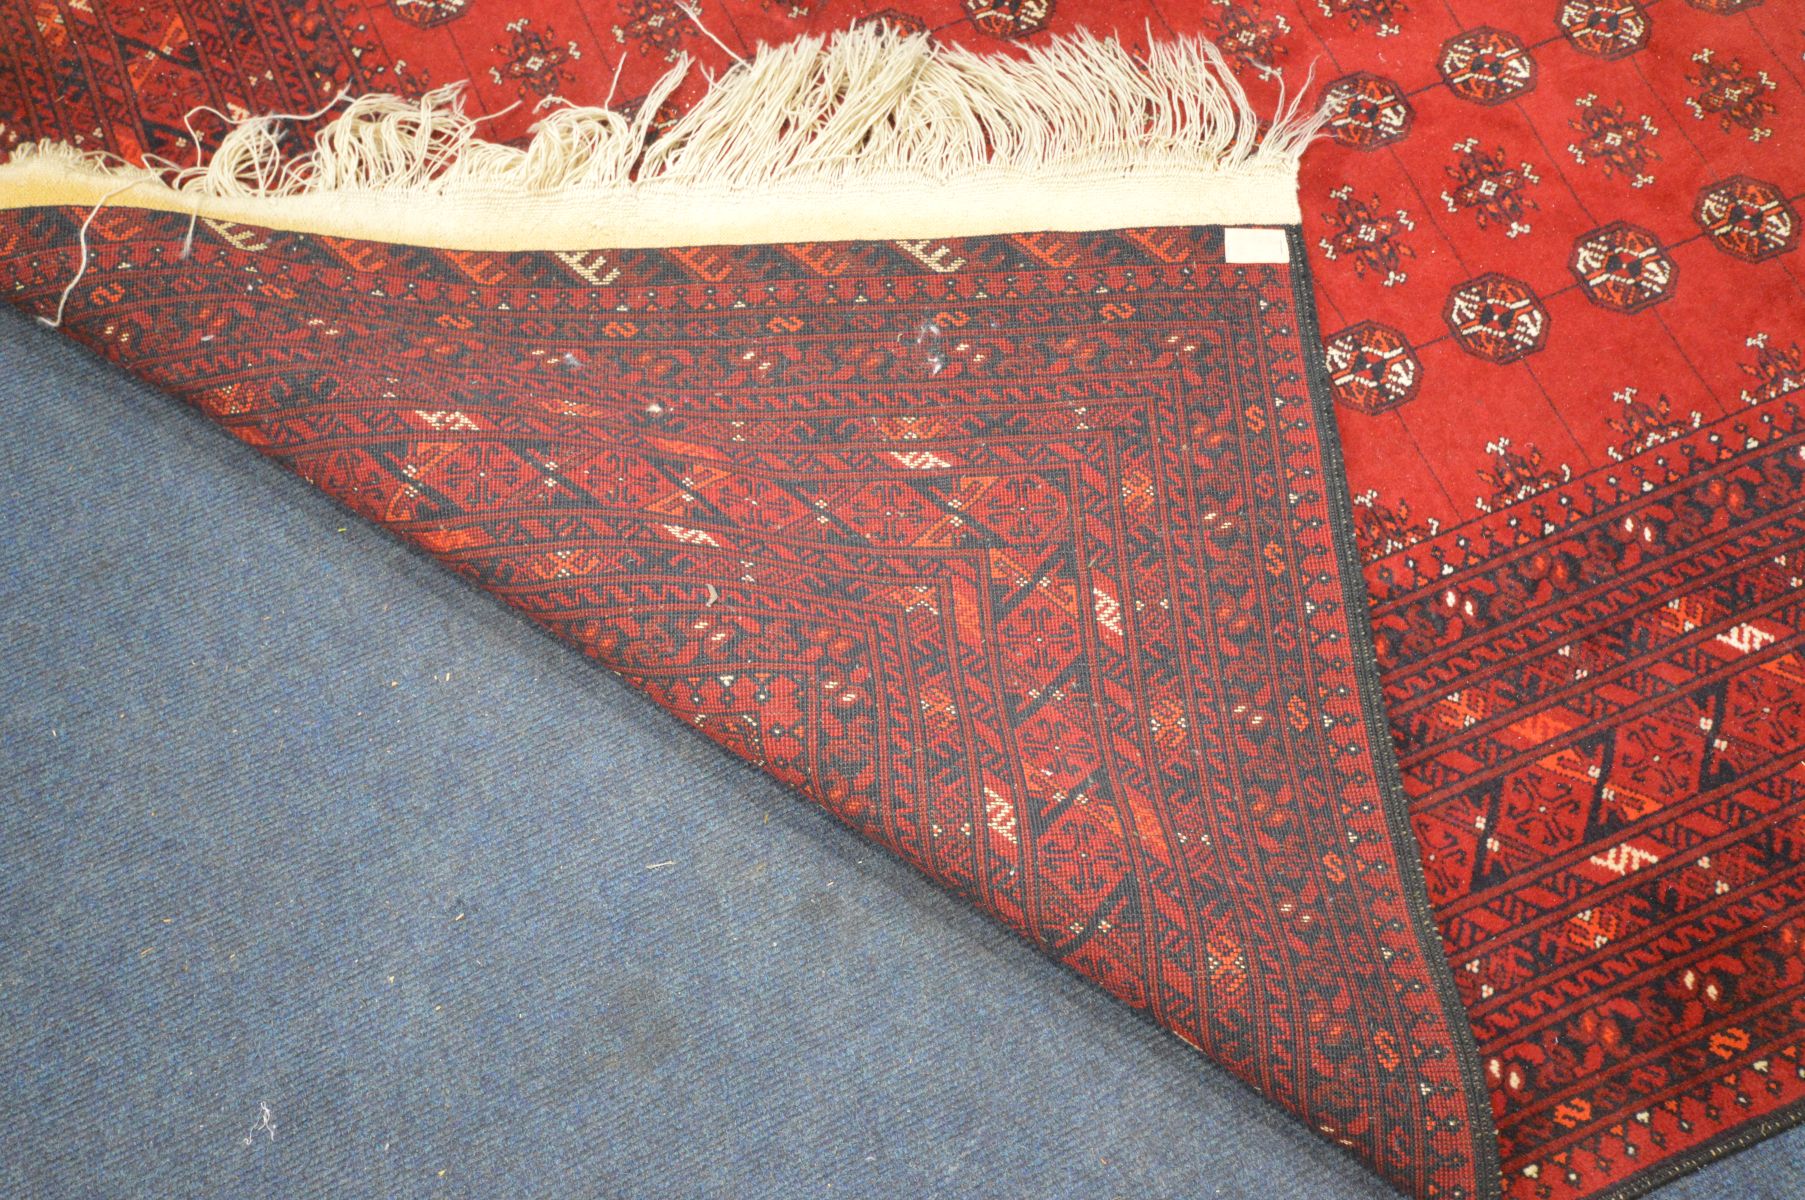 A 20TH CENTURY RED GROUND TEKKE RUG, 304cm x 200cm - Image 4 of 4